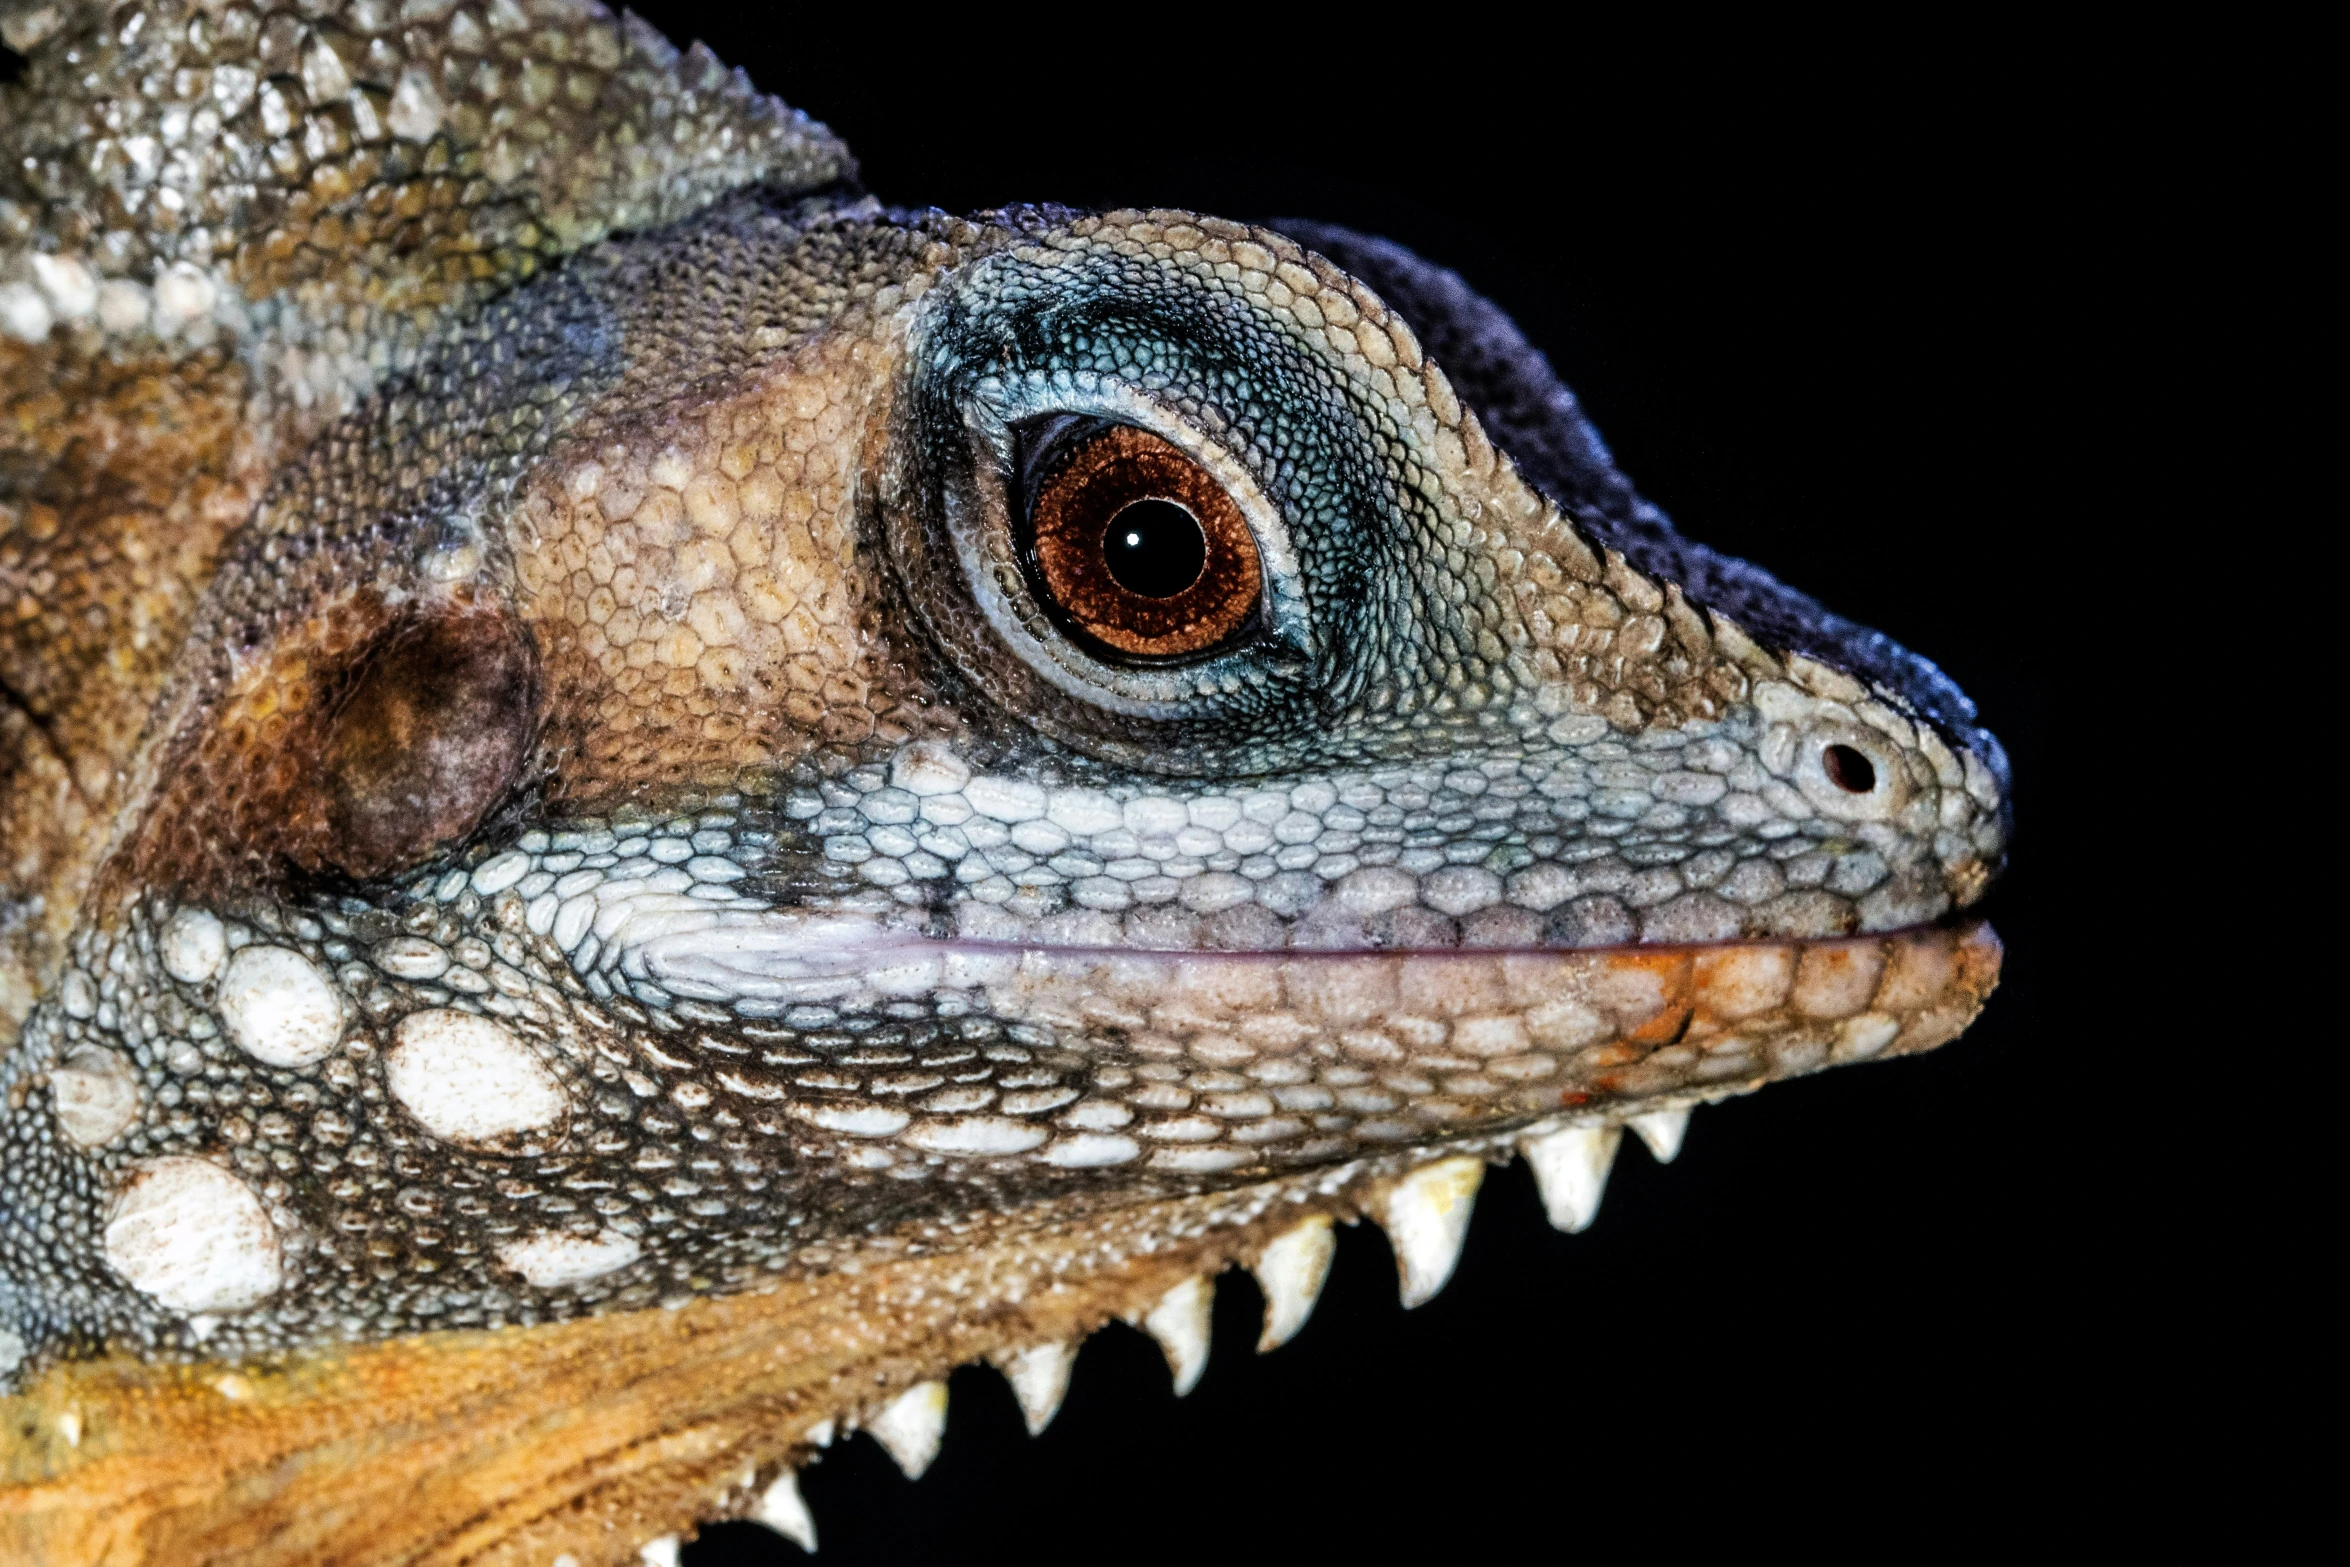 a close up view of a reptiled lizard's head